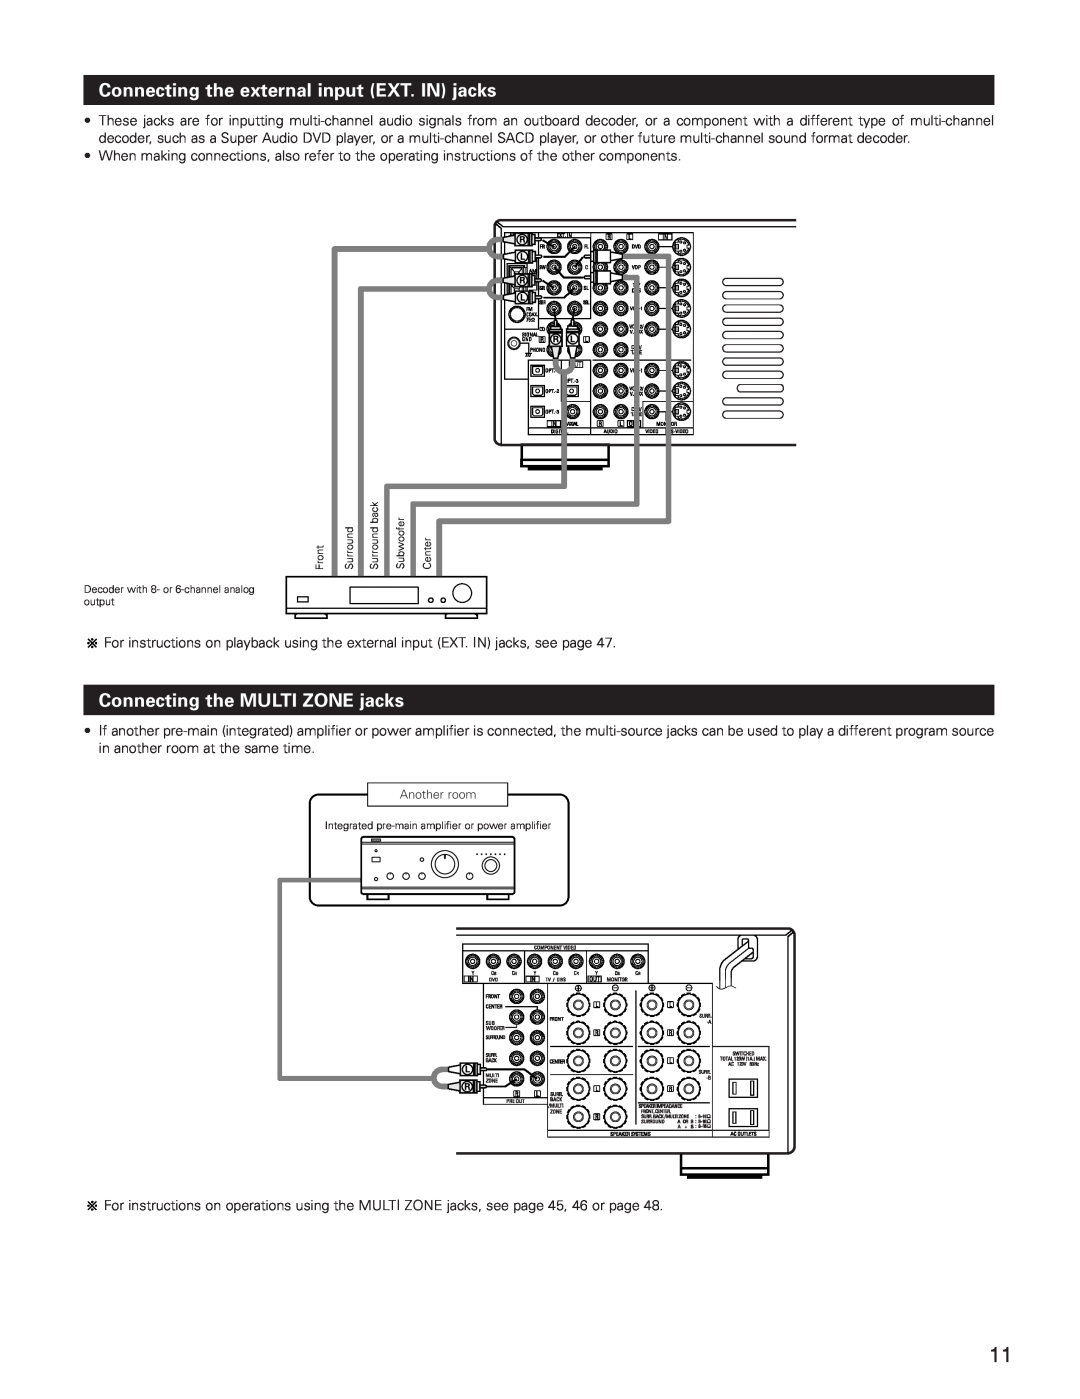 Denon AVR-3801 manual Connecting the external input EXT. IN jacks, Connecting the MULTI ZONE jacks, Another room 